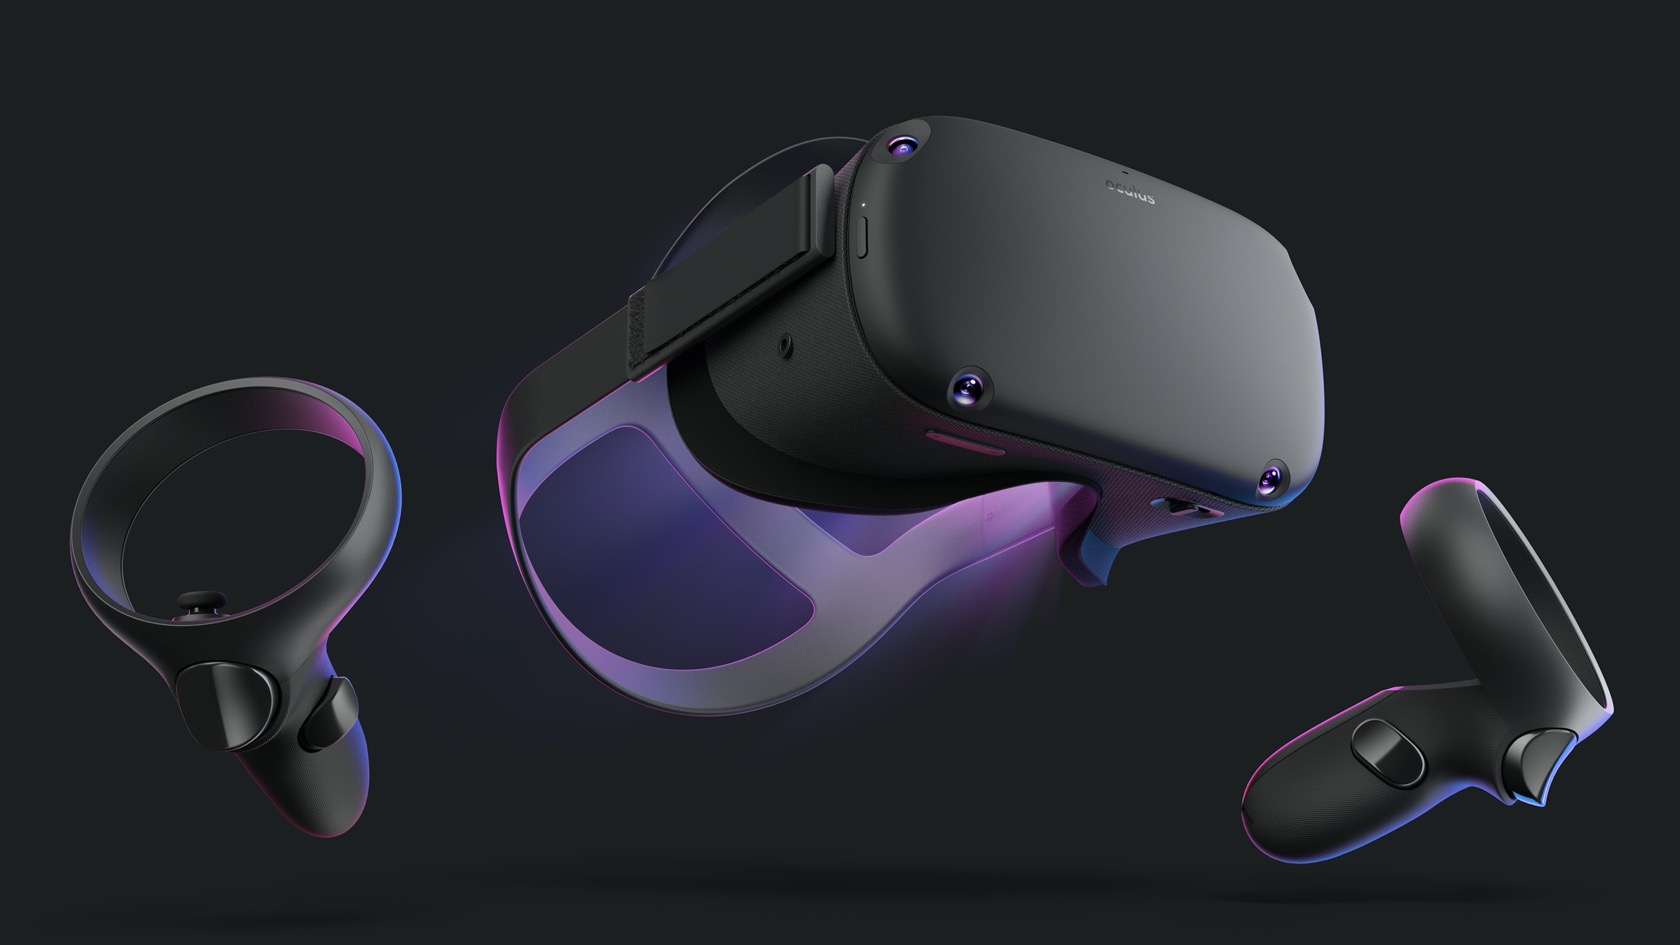 vr headset 2020 upcoming